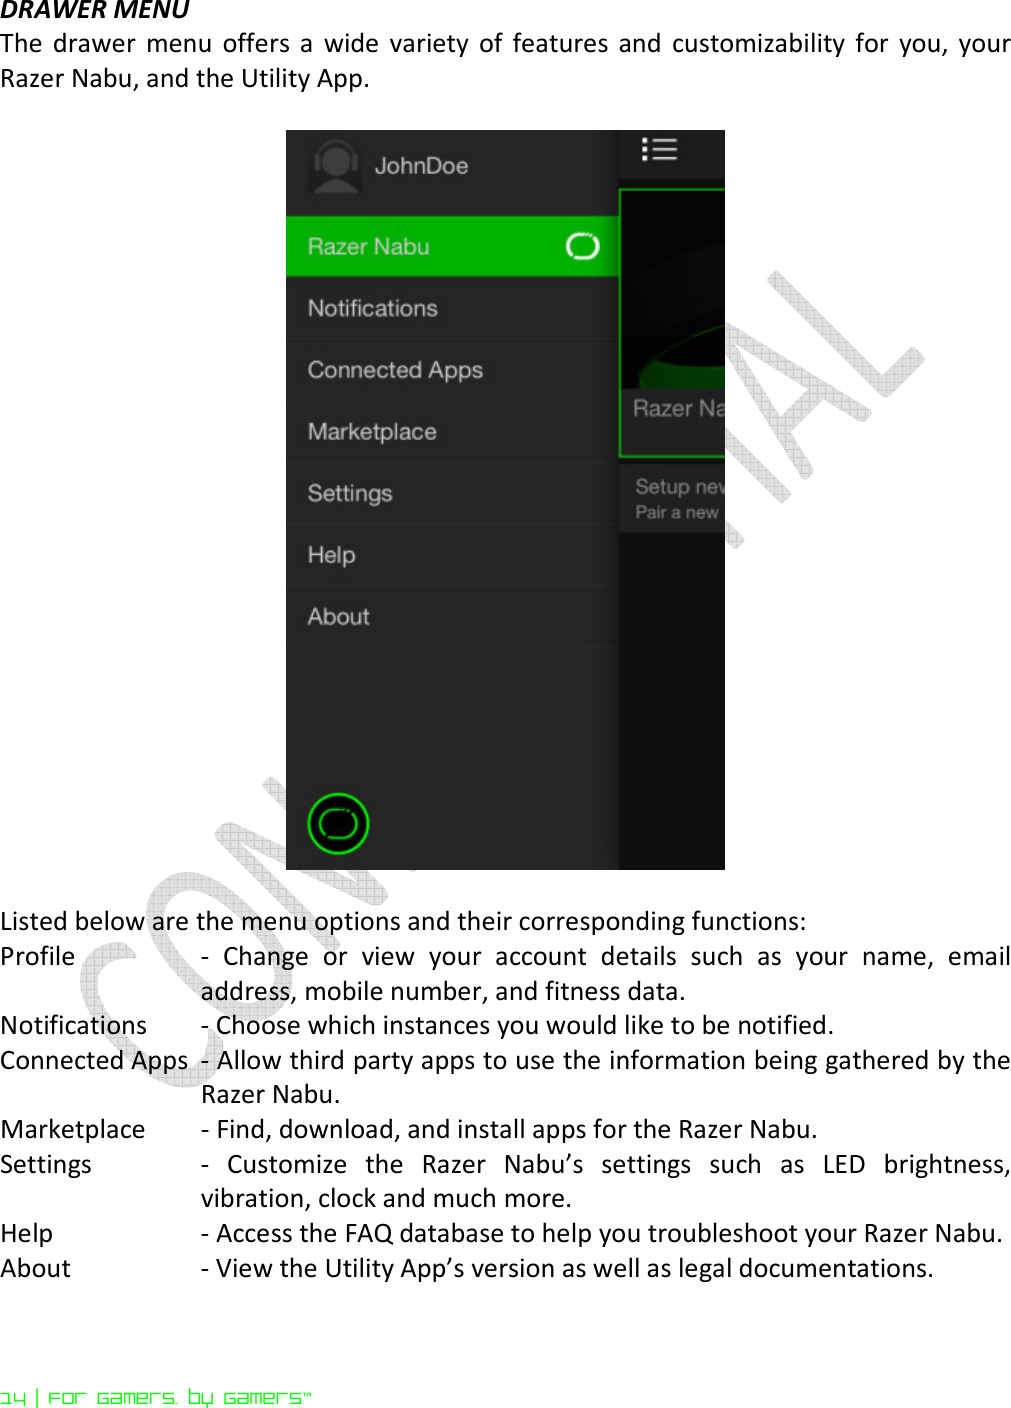  14 | For gamers. by gamers™ DRAWER MENU The  drawer  menu  offers a  wide  variety  of  features  and  customizability  for  you,  your Razer Nabu, and the Utility App.     Listed below are the menu options and their corresponding functions: Profile  -  Change  or  view  your  account  details  such  as  your  name,  email address, mobile number, and fitness data. Notifications  - Choose which instances you would like to be notified. Connected Apps  - Allow third party apps to use the information being gathered by the Razer Nabu. Marketplace   - Find, download, and install apps for the Razer Nabu. Settings   -  Customize  the  Razer  Nabu’s  settings  such  as  LED  brightness, vibration, clock and much more. Help  - Access the FAQ database to help you troubleshoot your Razer Nabu. About  - View the Utility App’s version as well as legal documentations.  